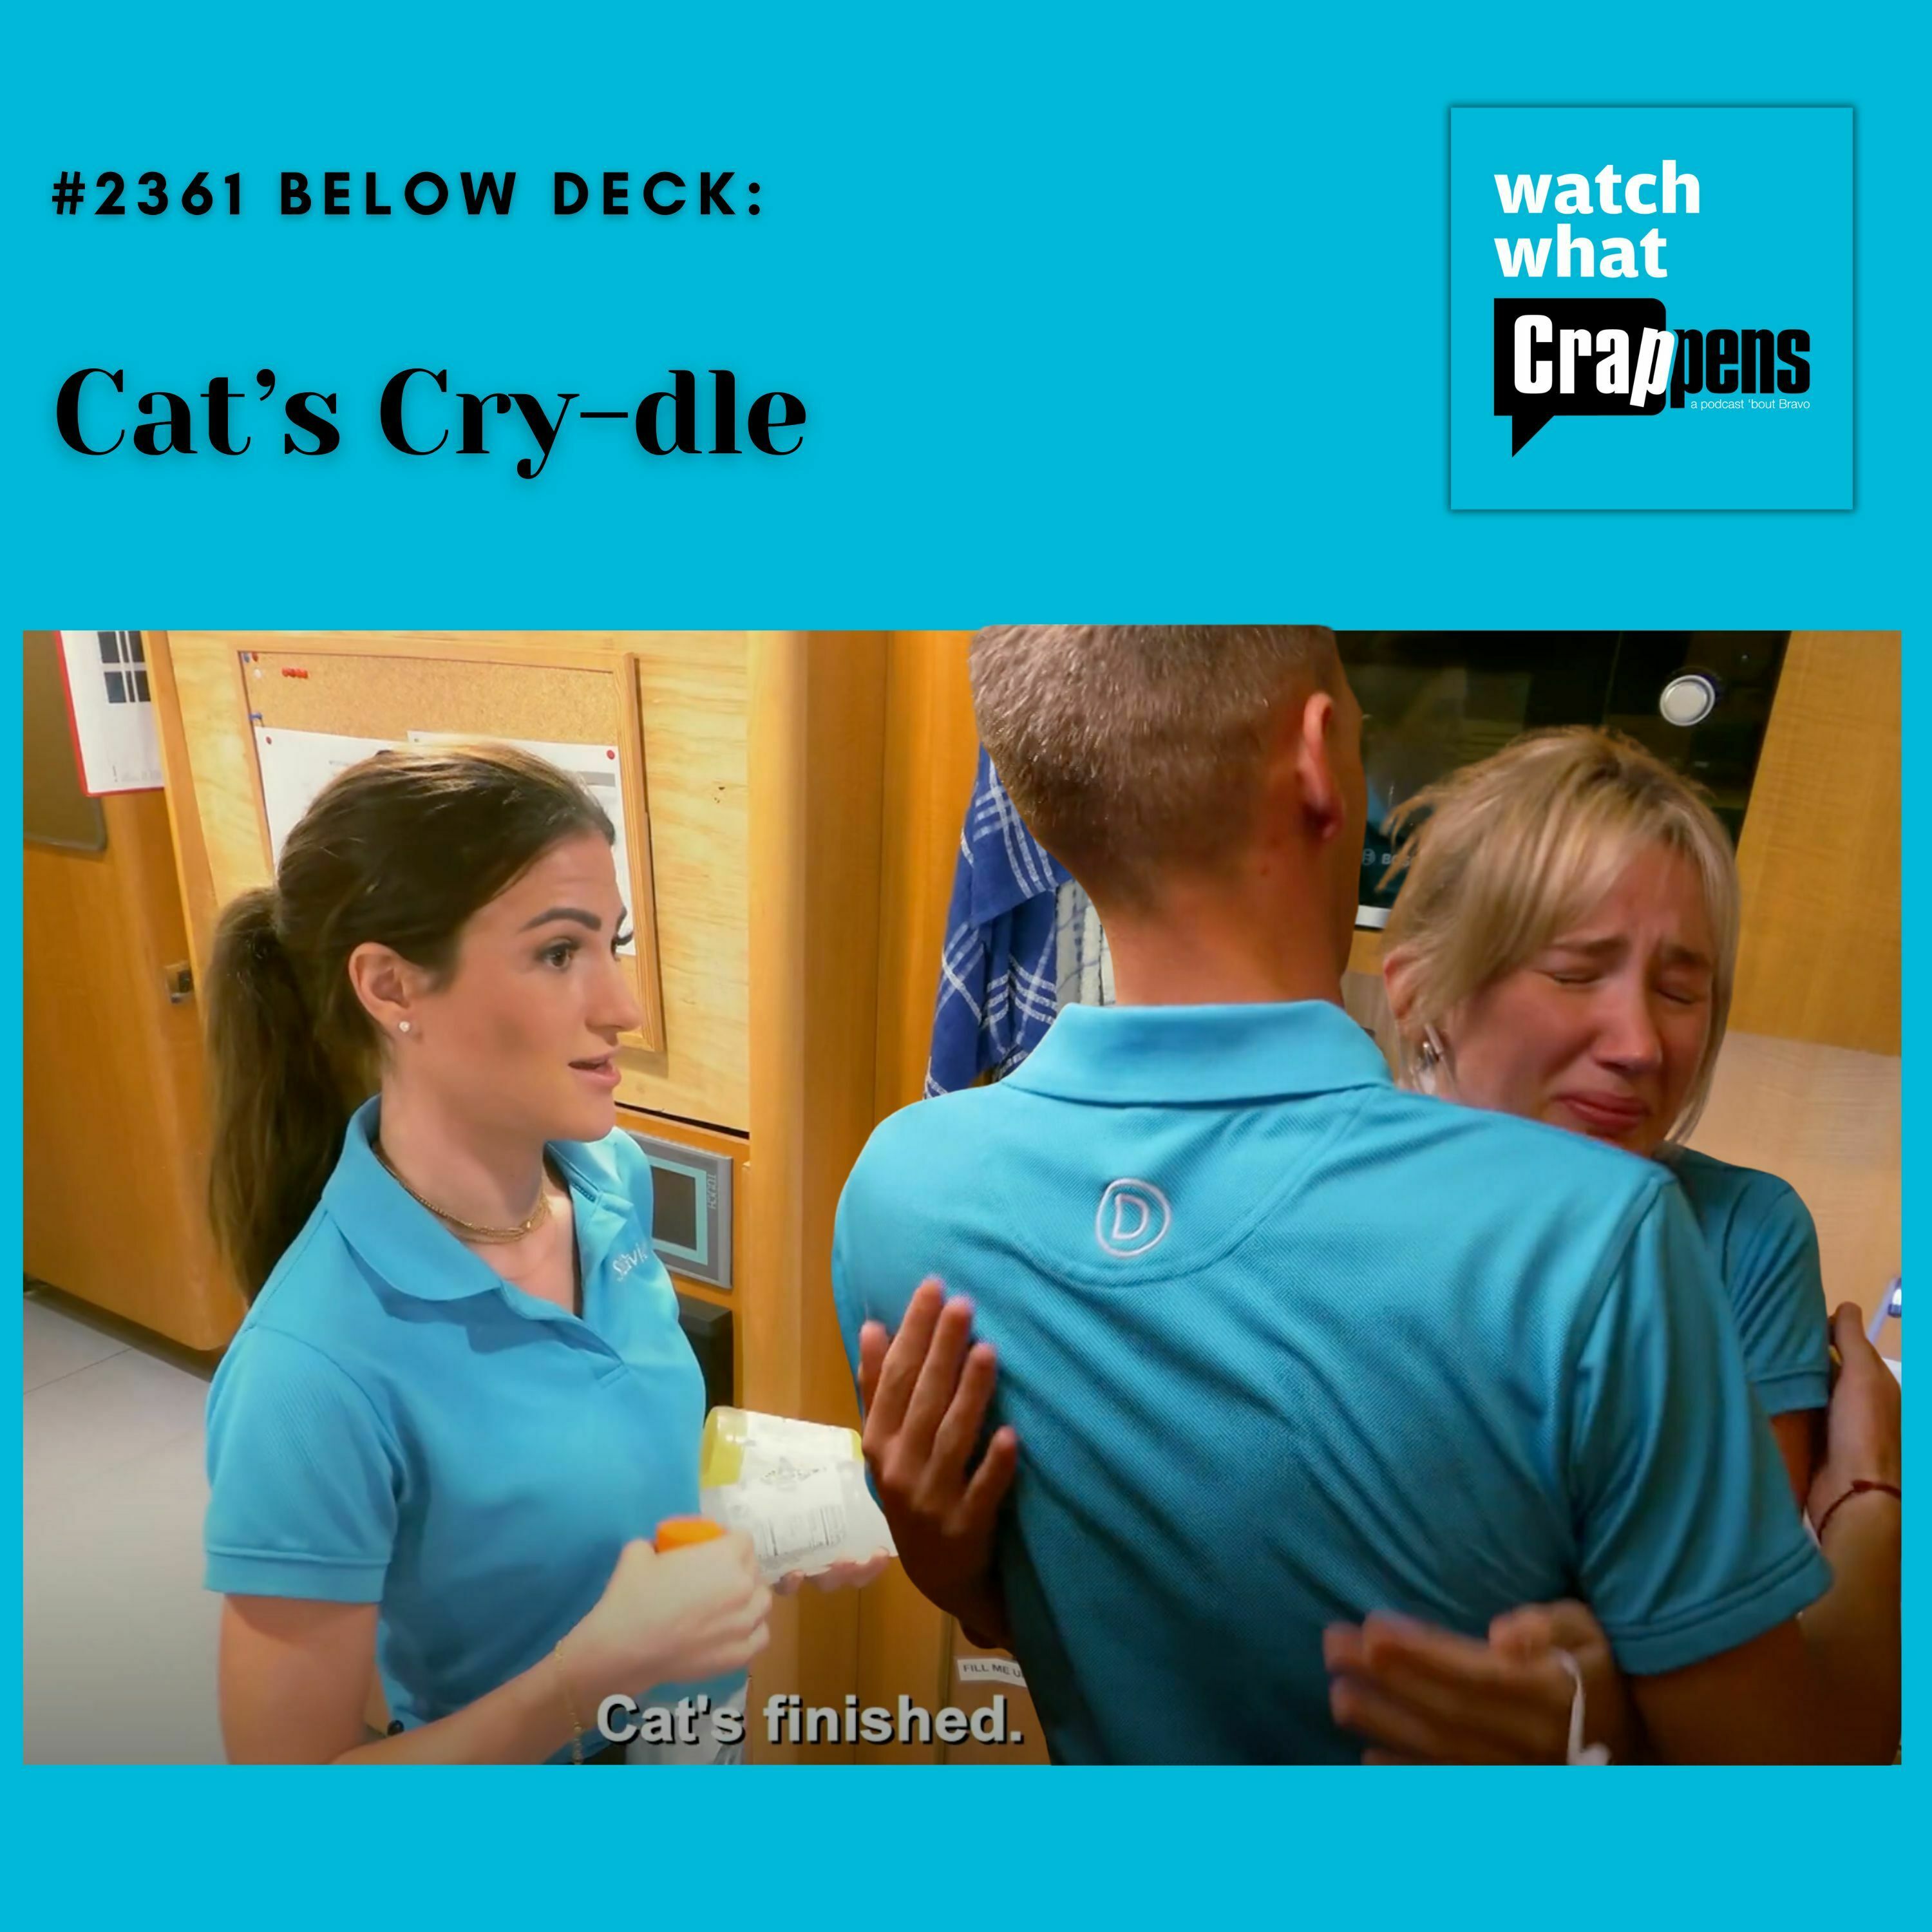 #2361 Below Deck: Cat’s Cry-dle